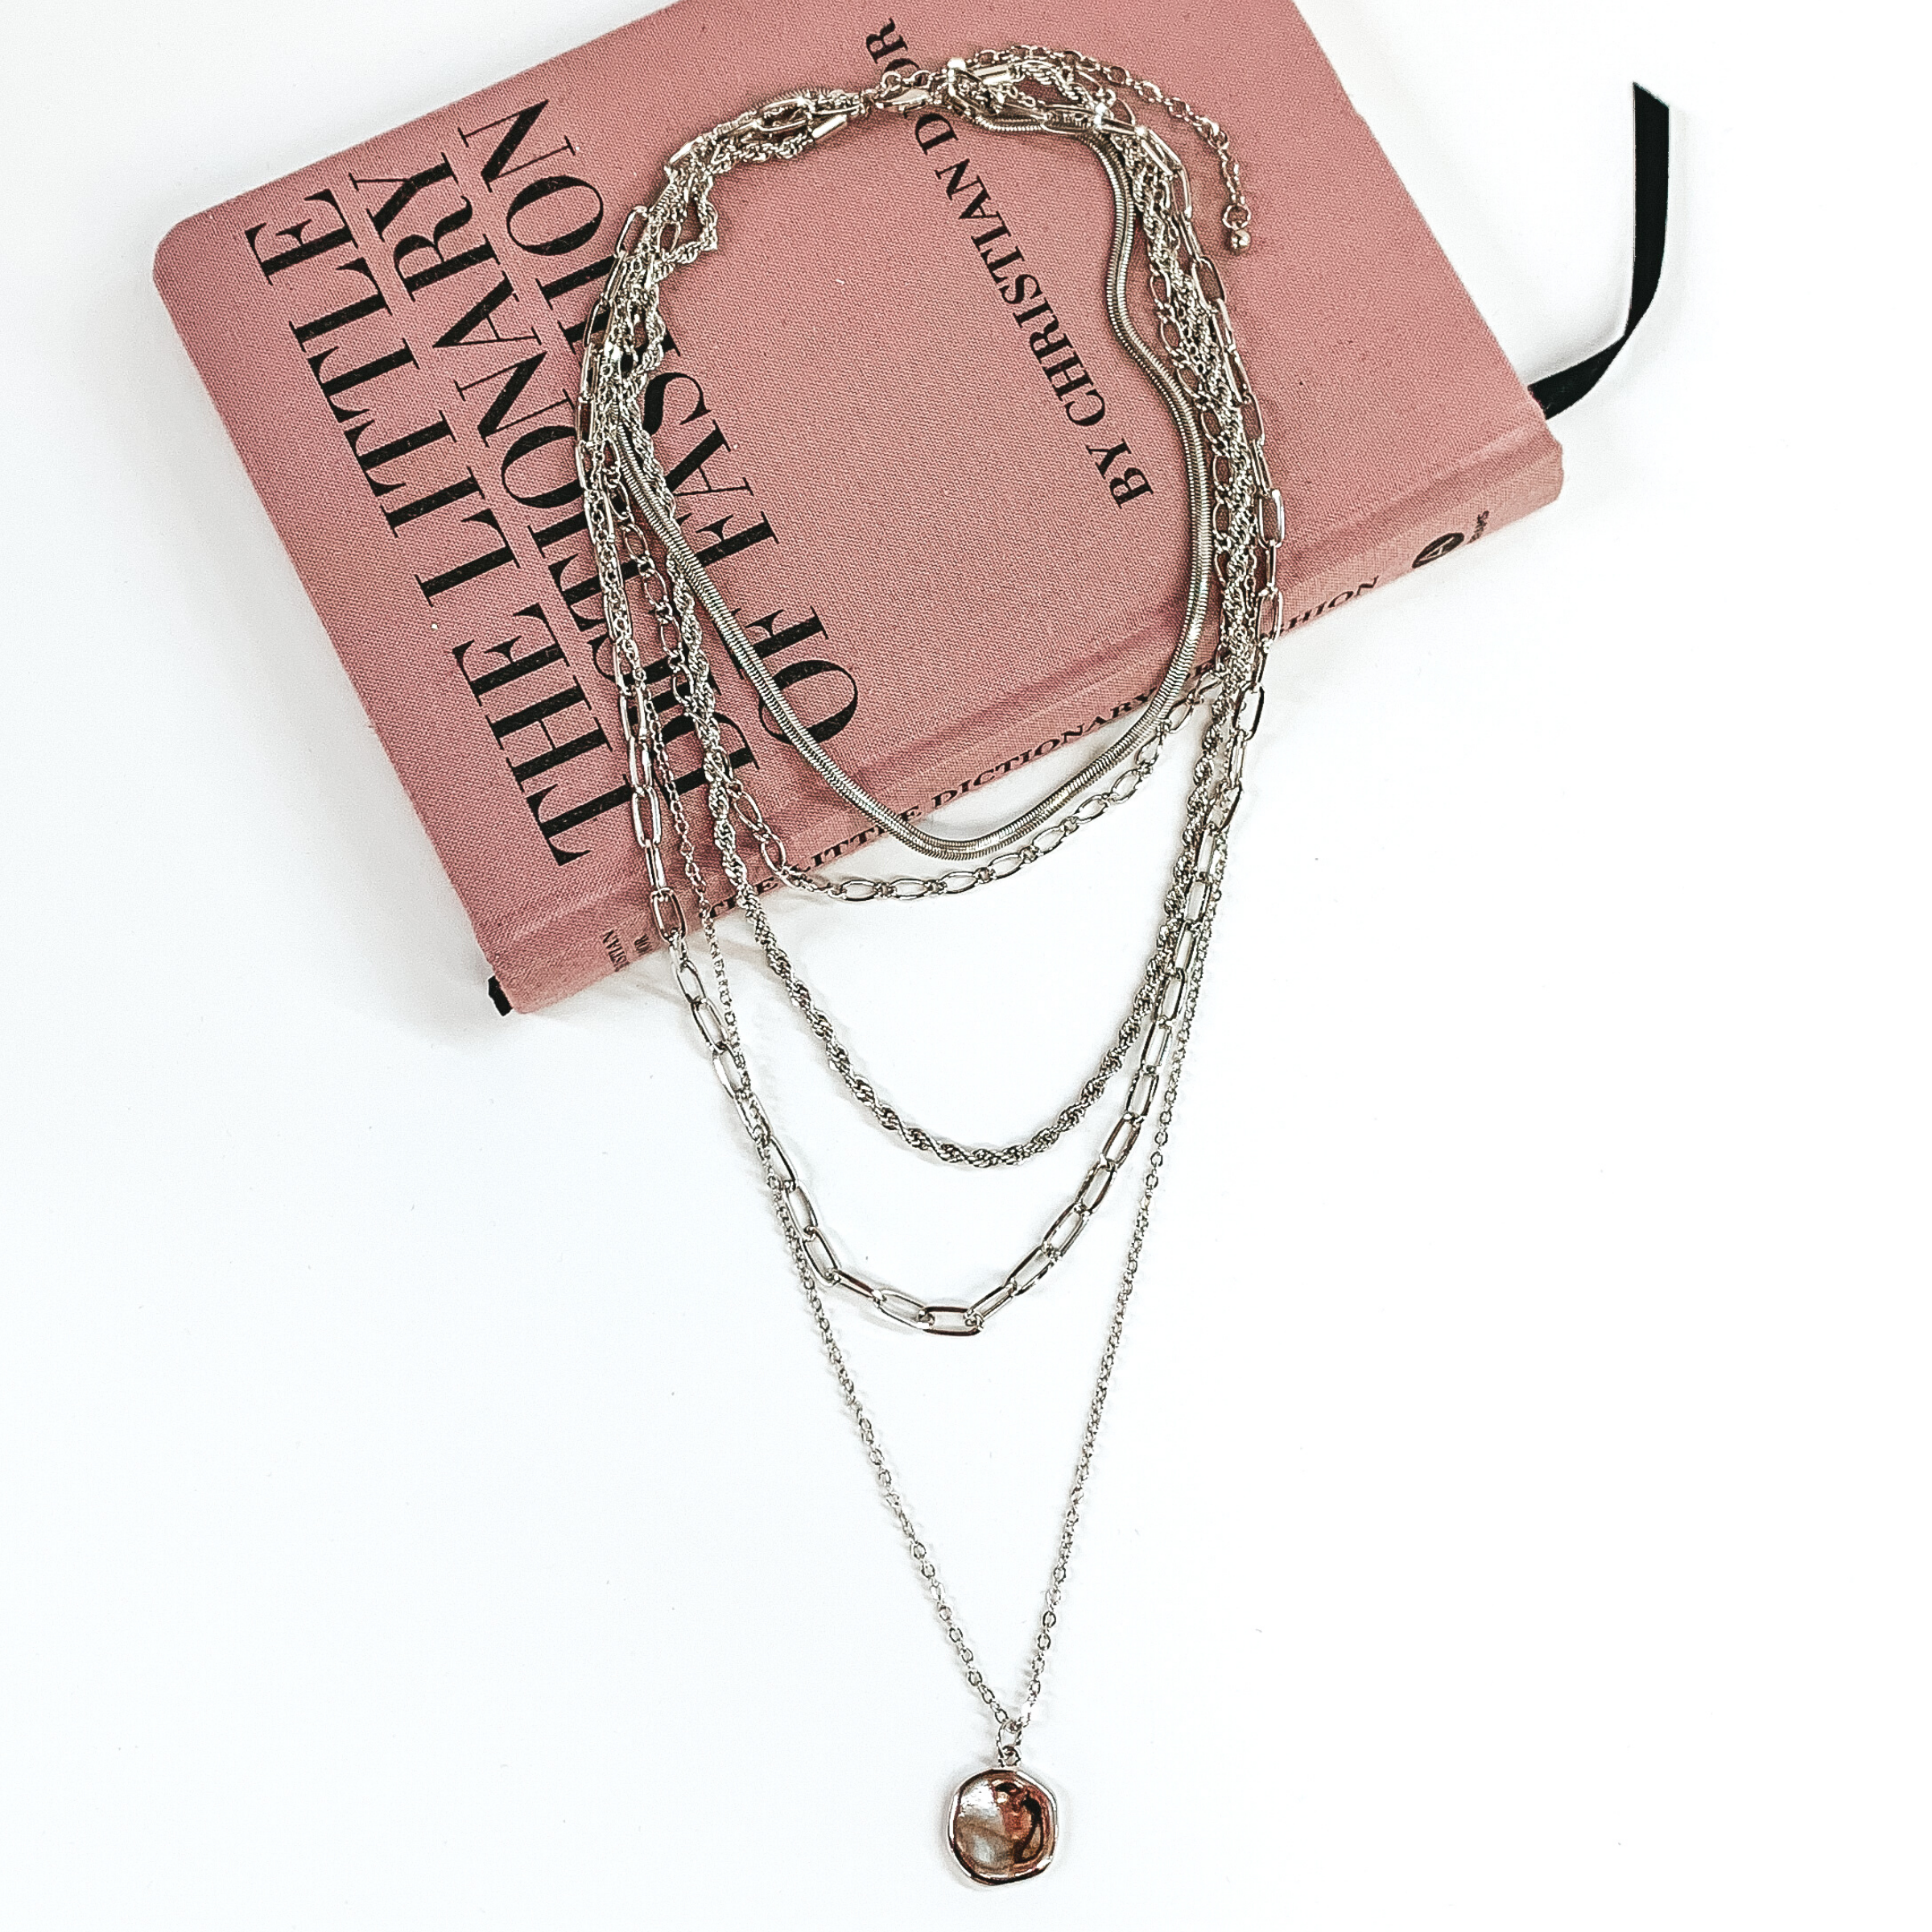 Silver multi chained necklace. This necklace has different types of chain for each strand and the longest strand has a circle pendant. This necklace is pictured laying partially on a mauve colored book on a white background. 